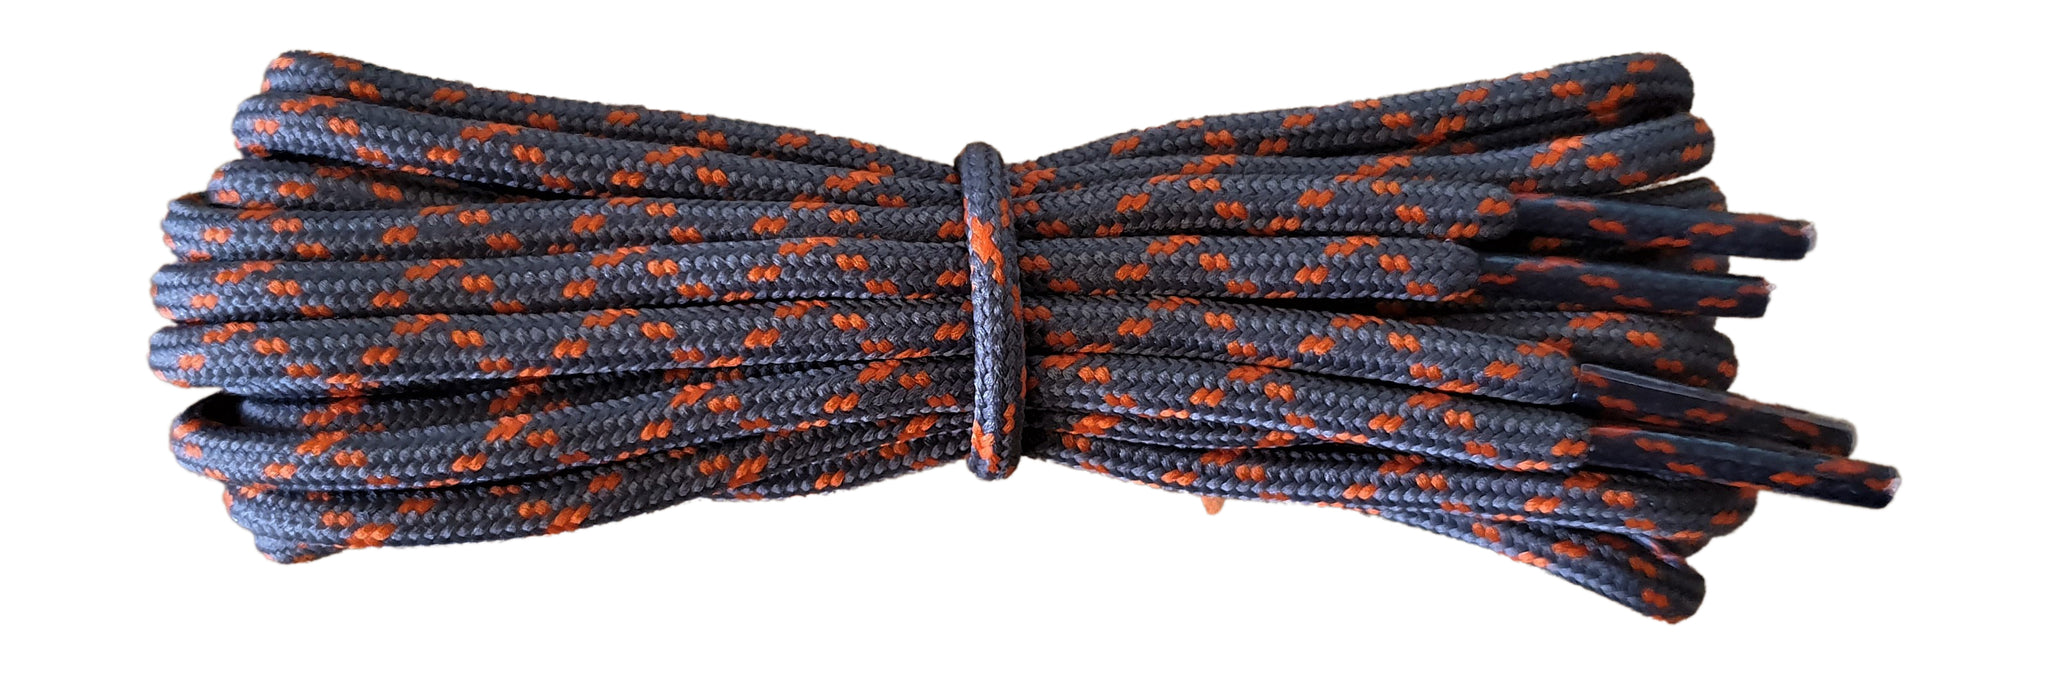 Strong round Shoelaces Dark Grey with Orange flecks for walking shoes or trainers. - fabmania shoe laces